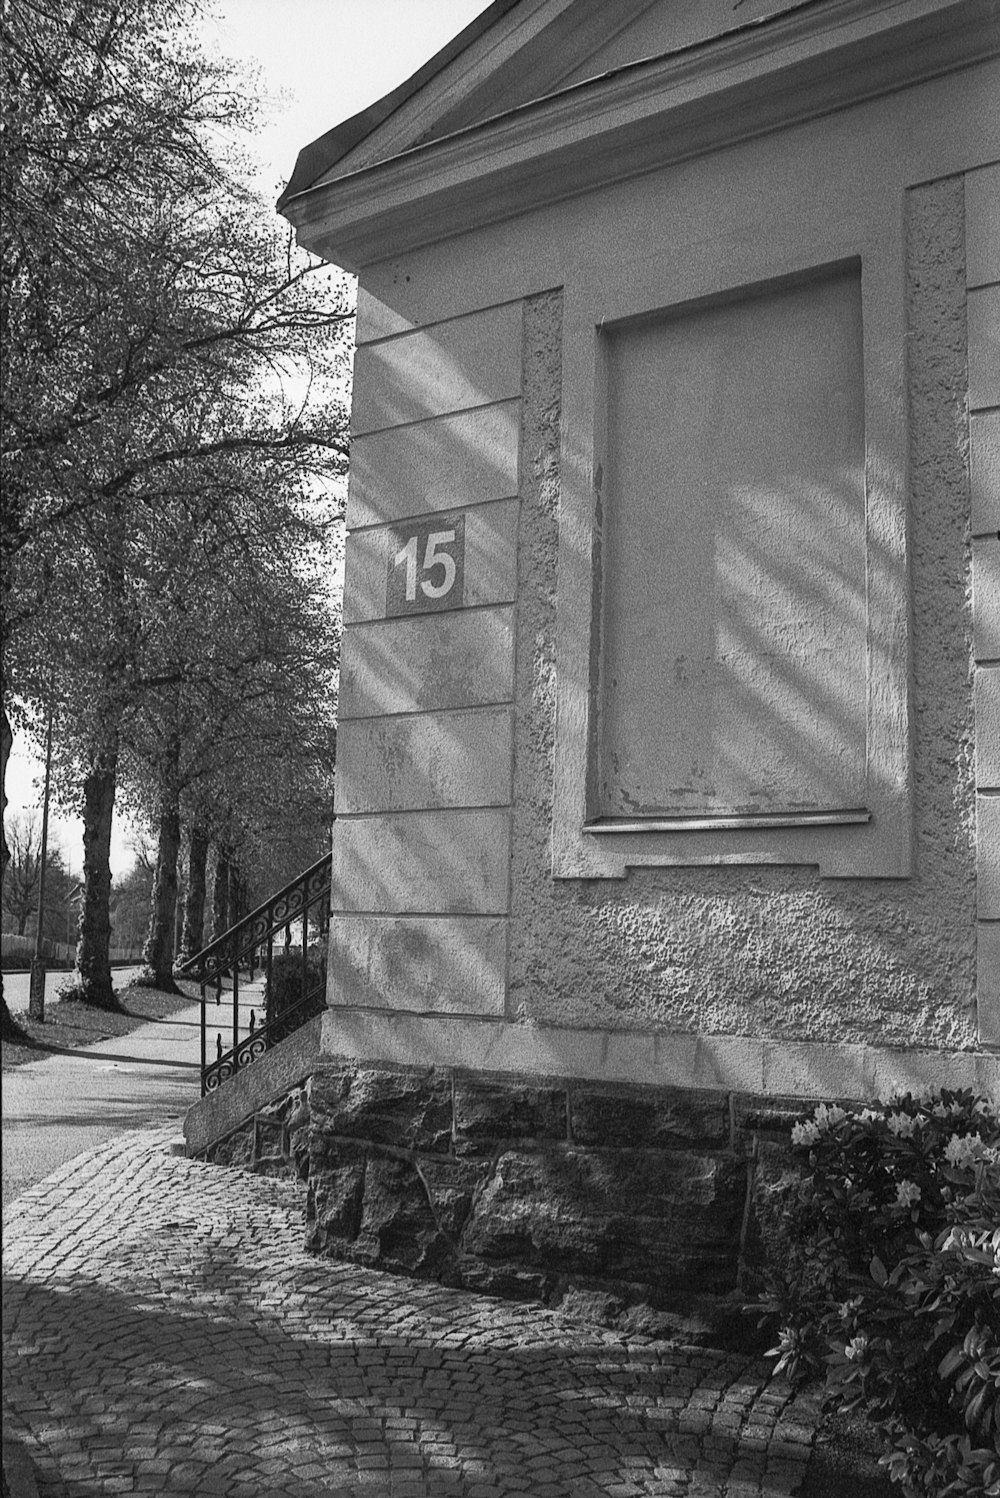 a black and white photo of a building with a number on it